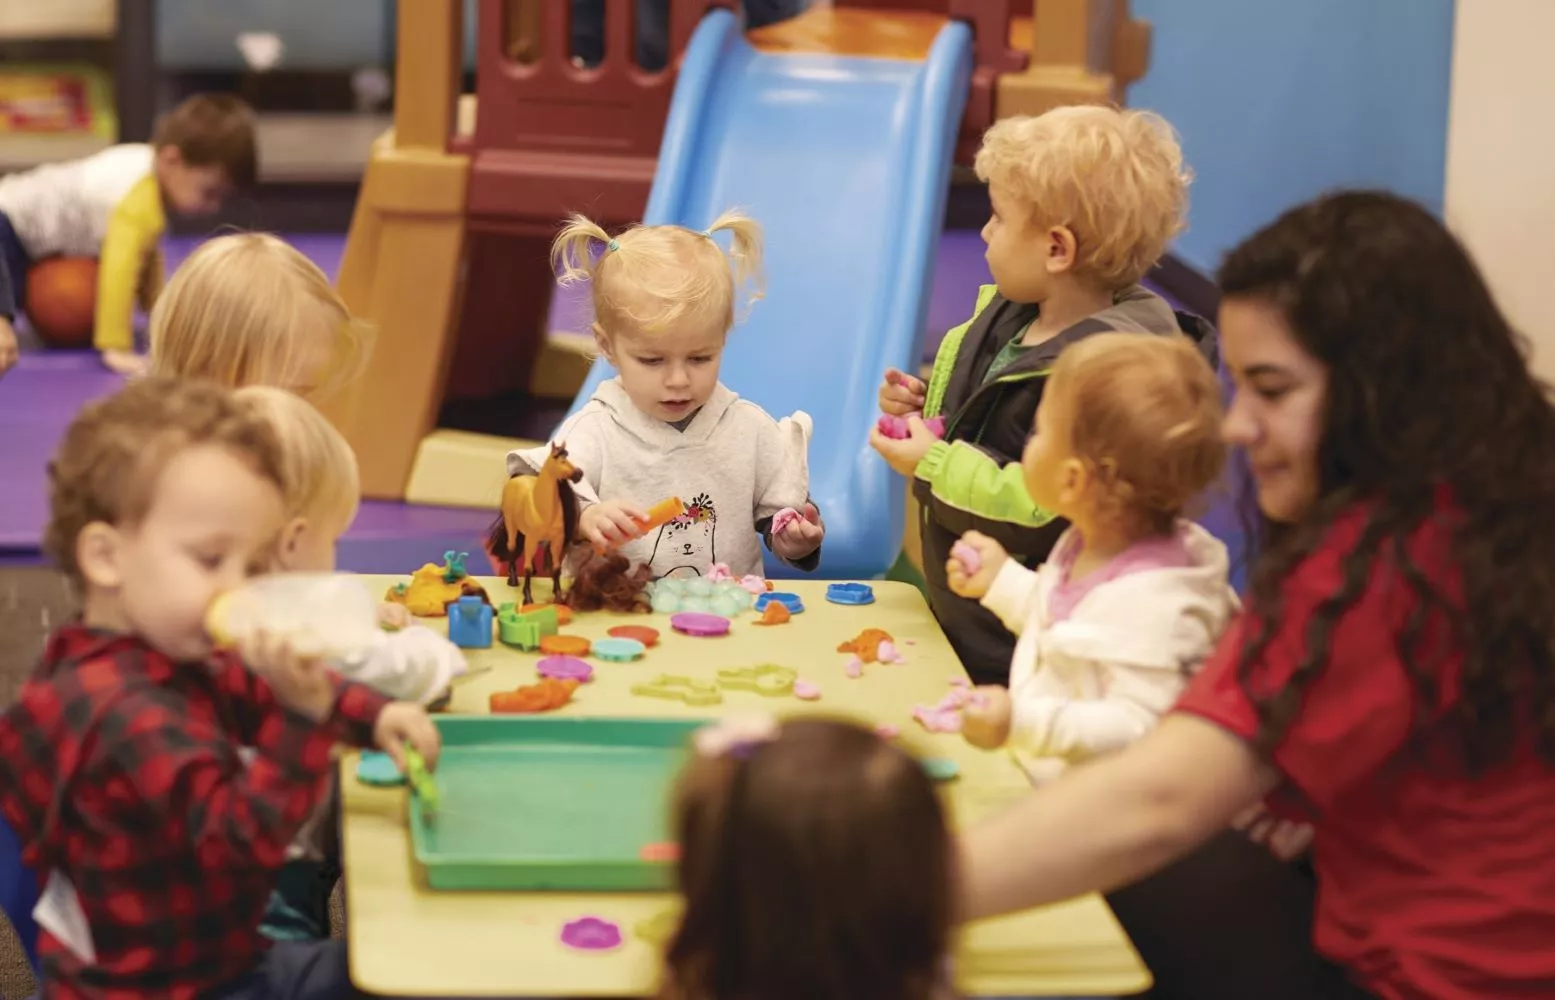 Group of toddlers supervised while playing with toys on a table.